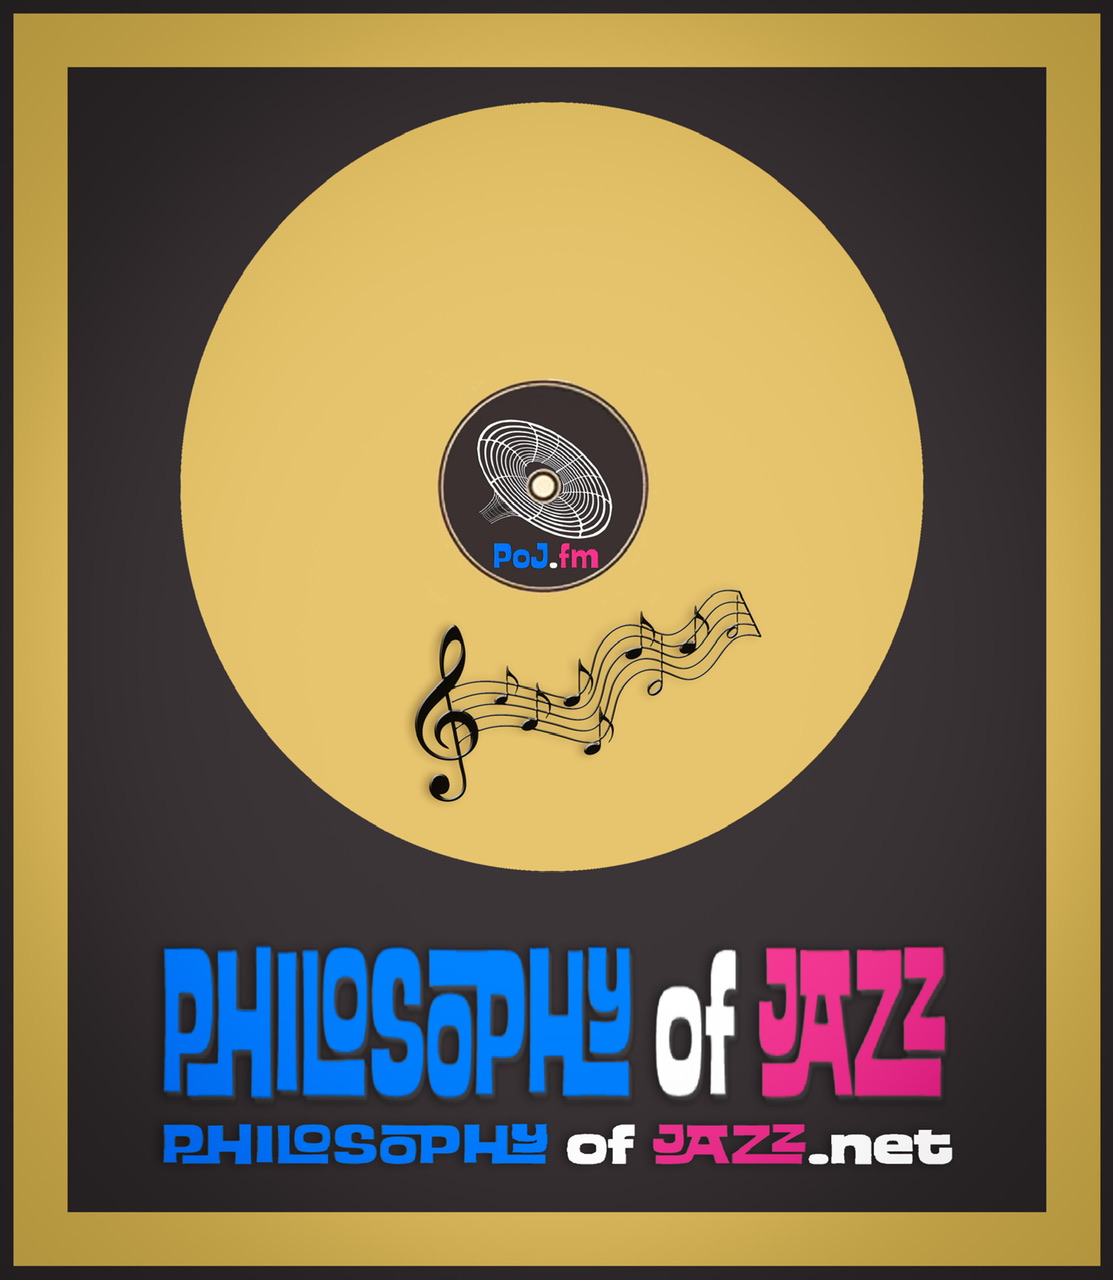 A framed graphic of a golden record with no grooves showing containing a centered PoJ.fm logo and the words "Philosophy of Jazz" centered below.